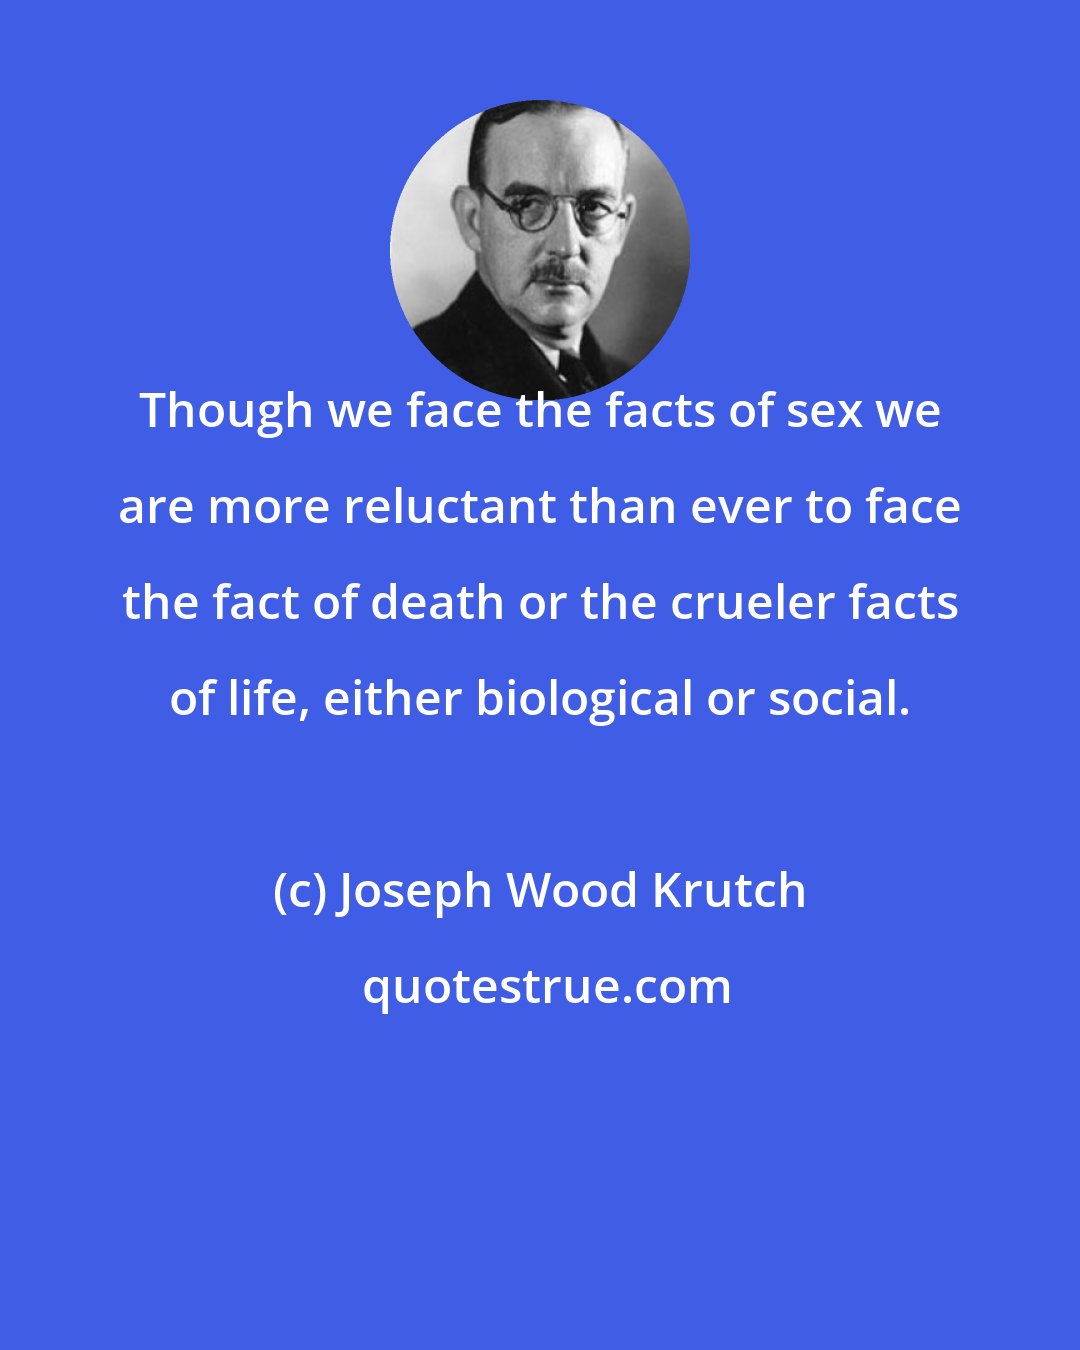 Joseph Wood Krutch: Though we face the facts of sex we are more reluctant than ever to face the fact of death or the crueler facts of life, either biological or social.